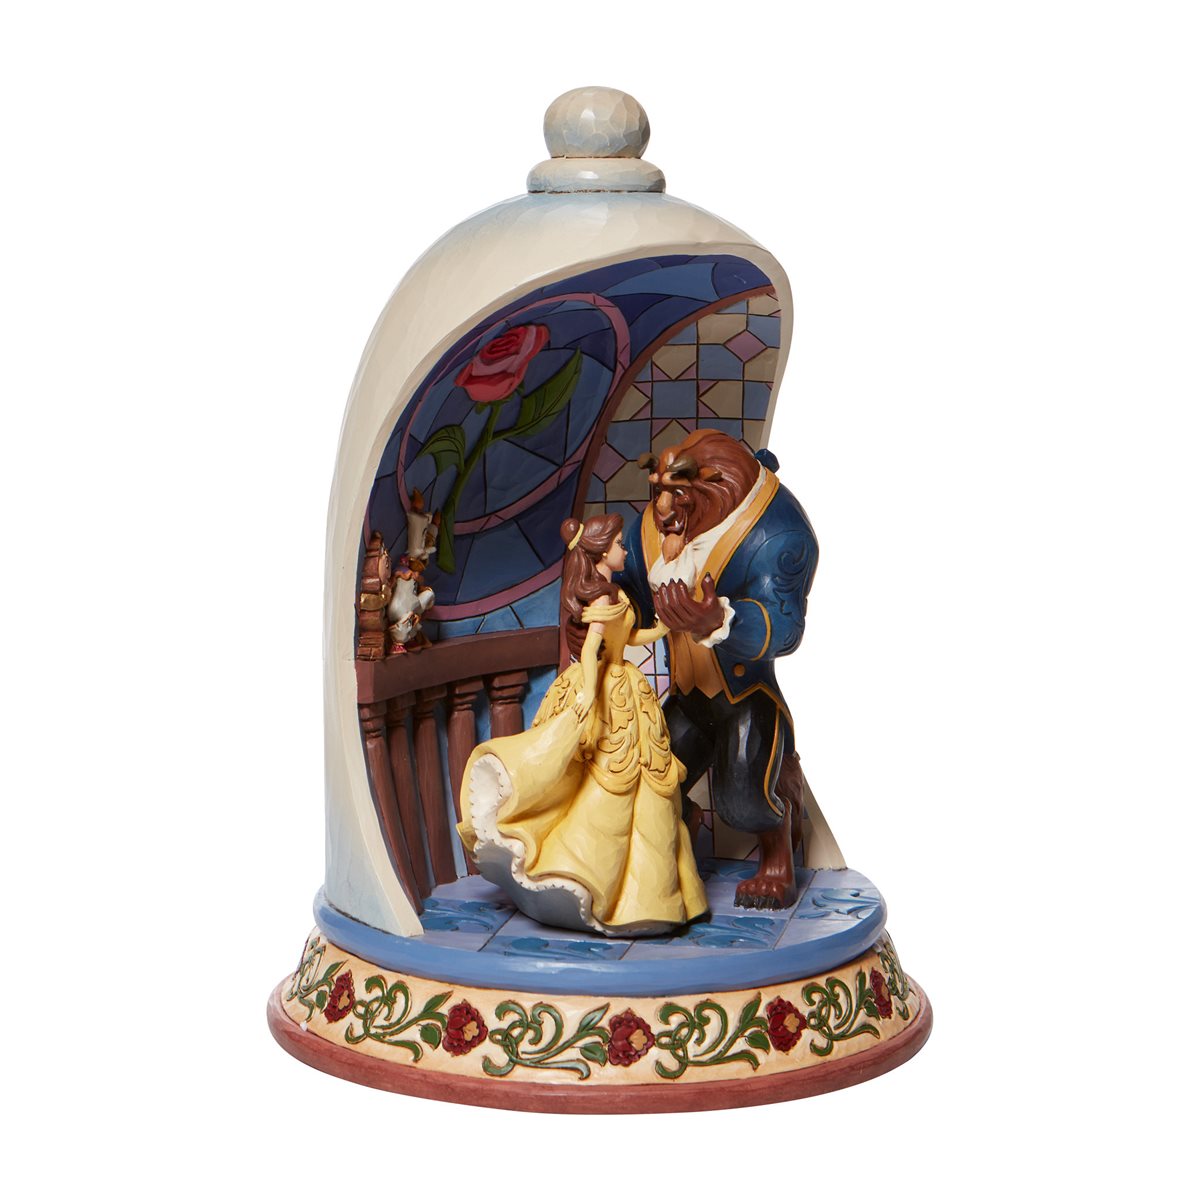 Disney Traditions Beauty & the Beast Figurines by Jim Shore